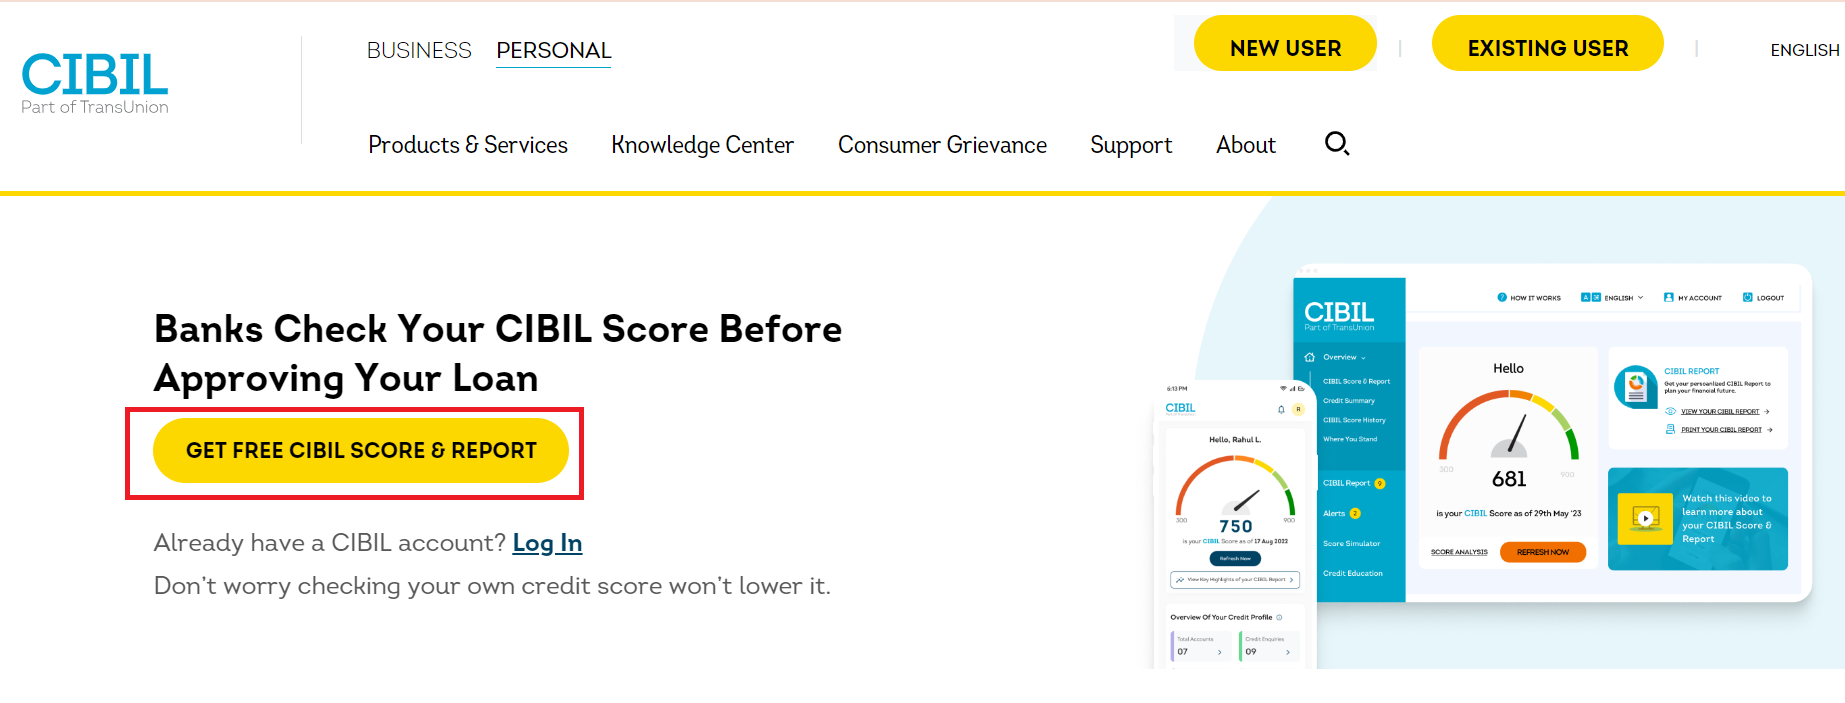 How to Check Your CIBIL Score